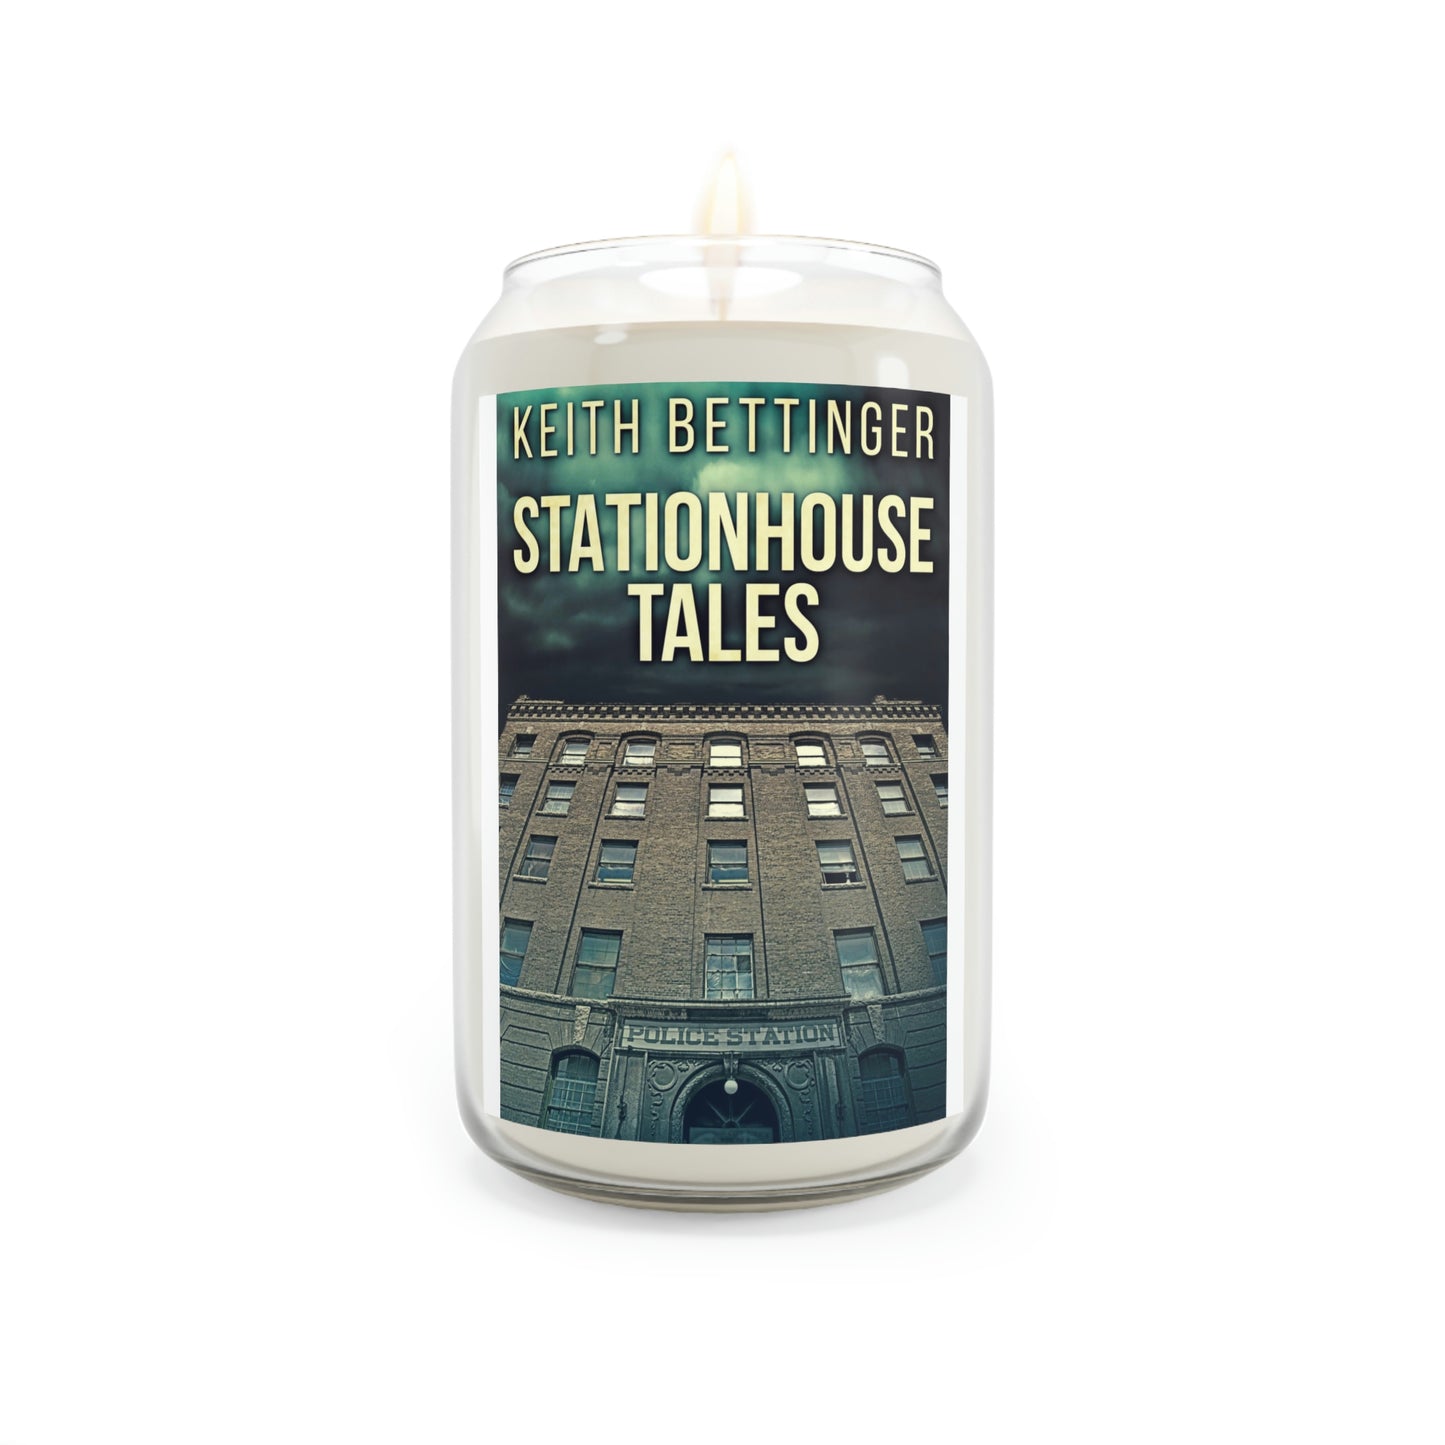 Stationhouse Tales - Scented Candle